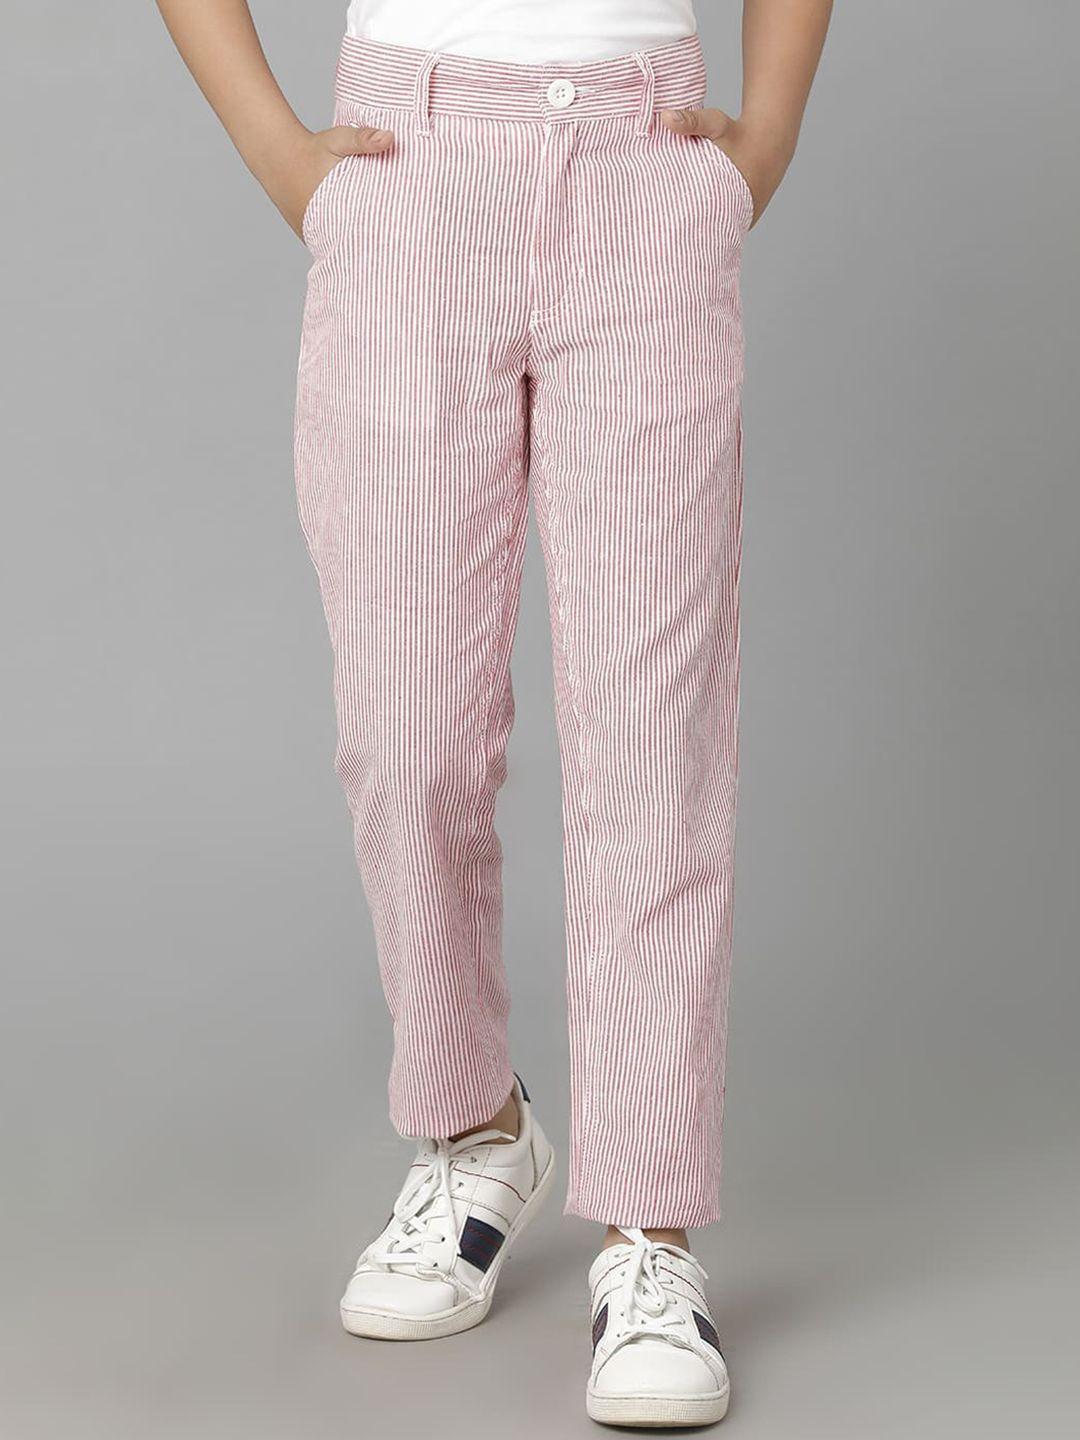 UNDER FOURTEEN ONLY Boys Striped Cotton Trousers